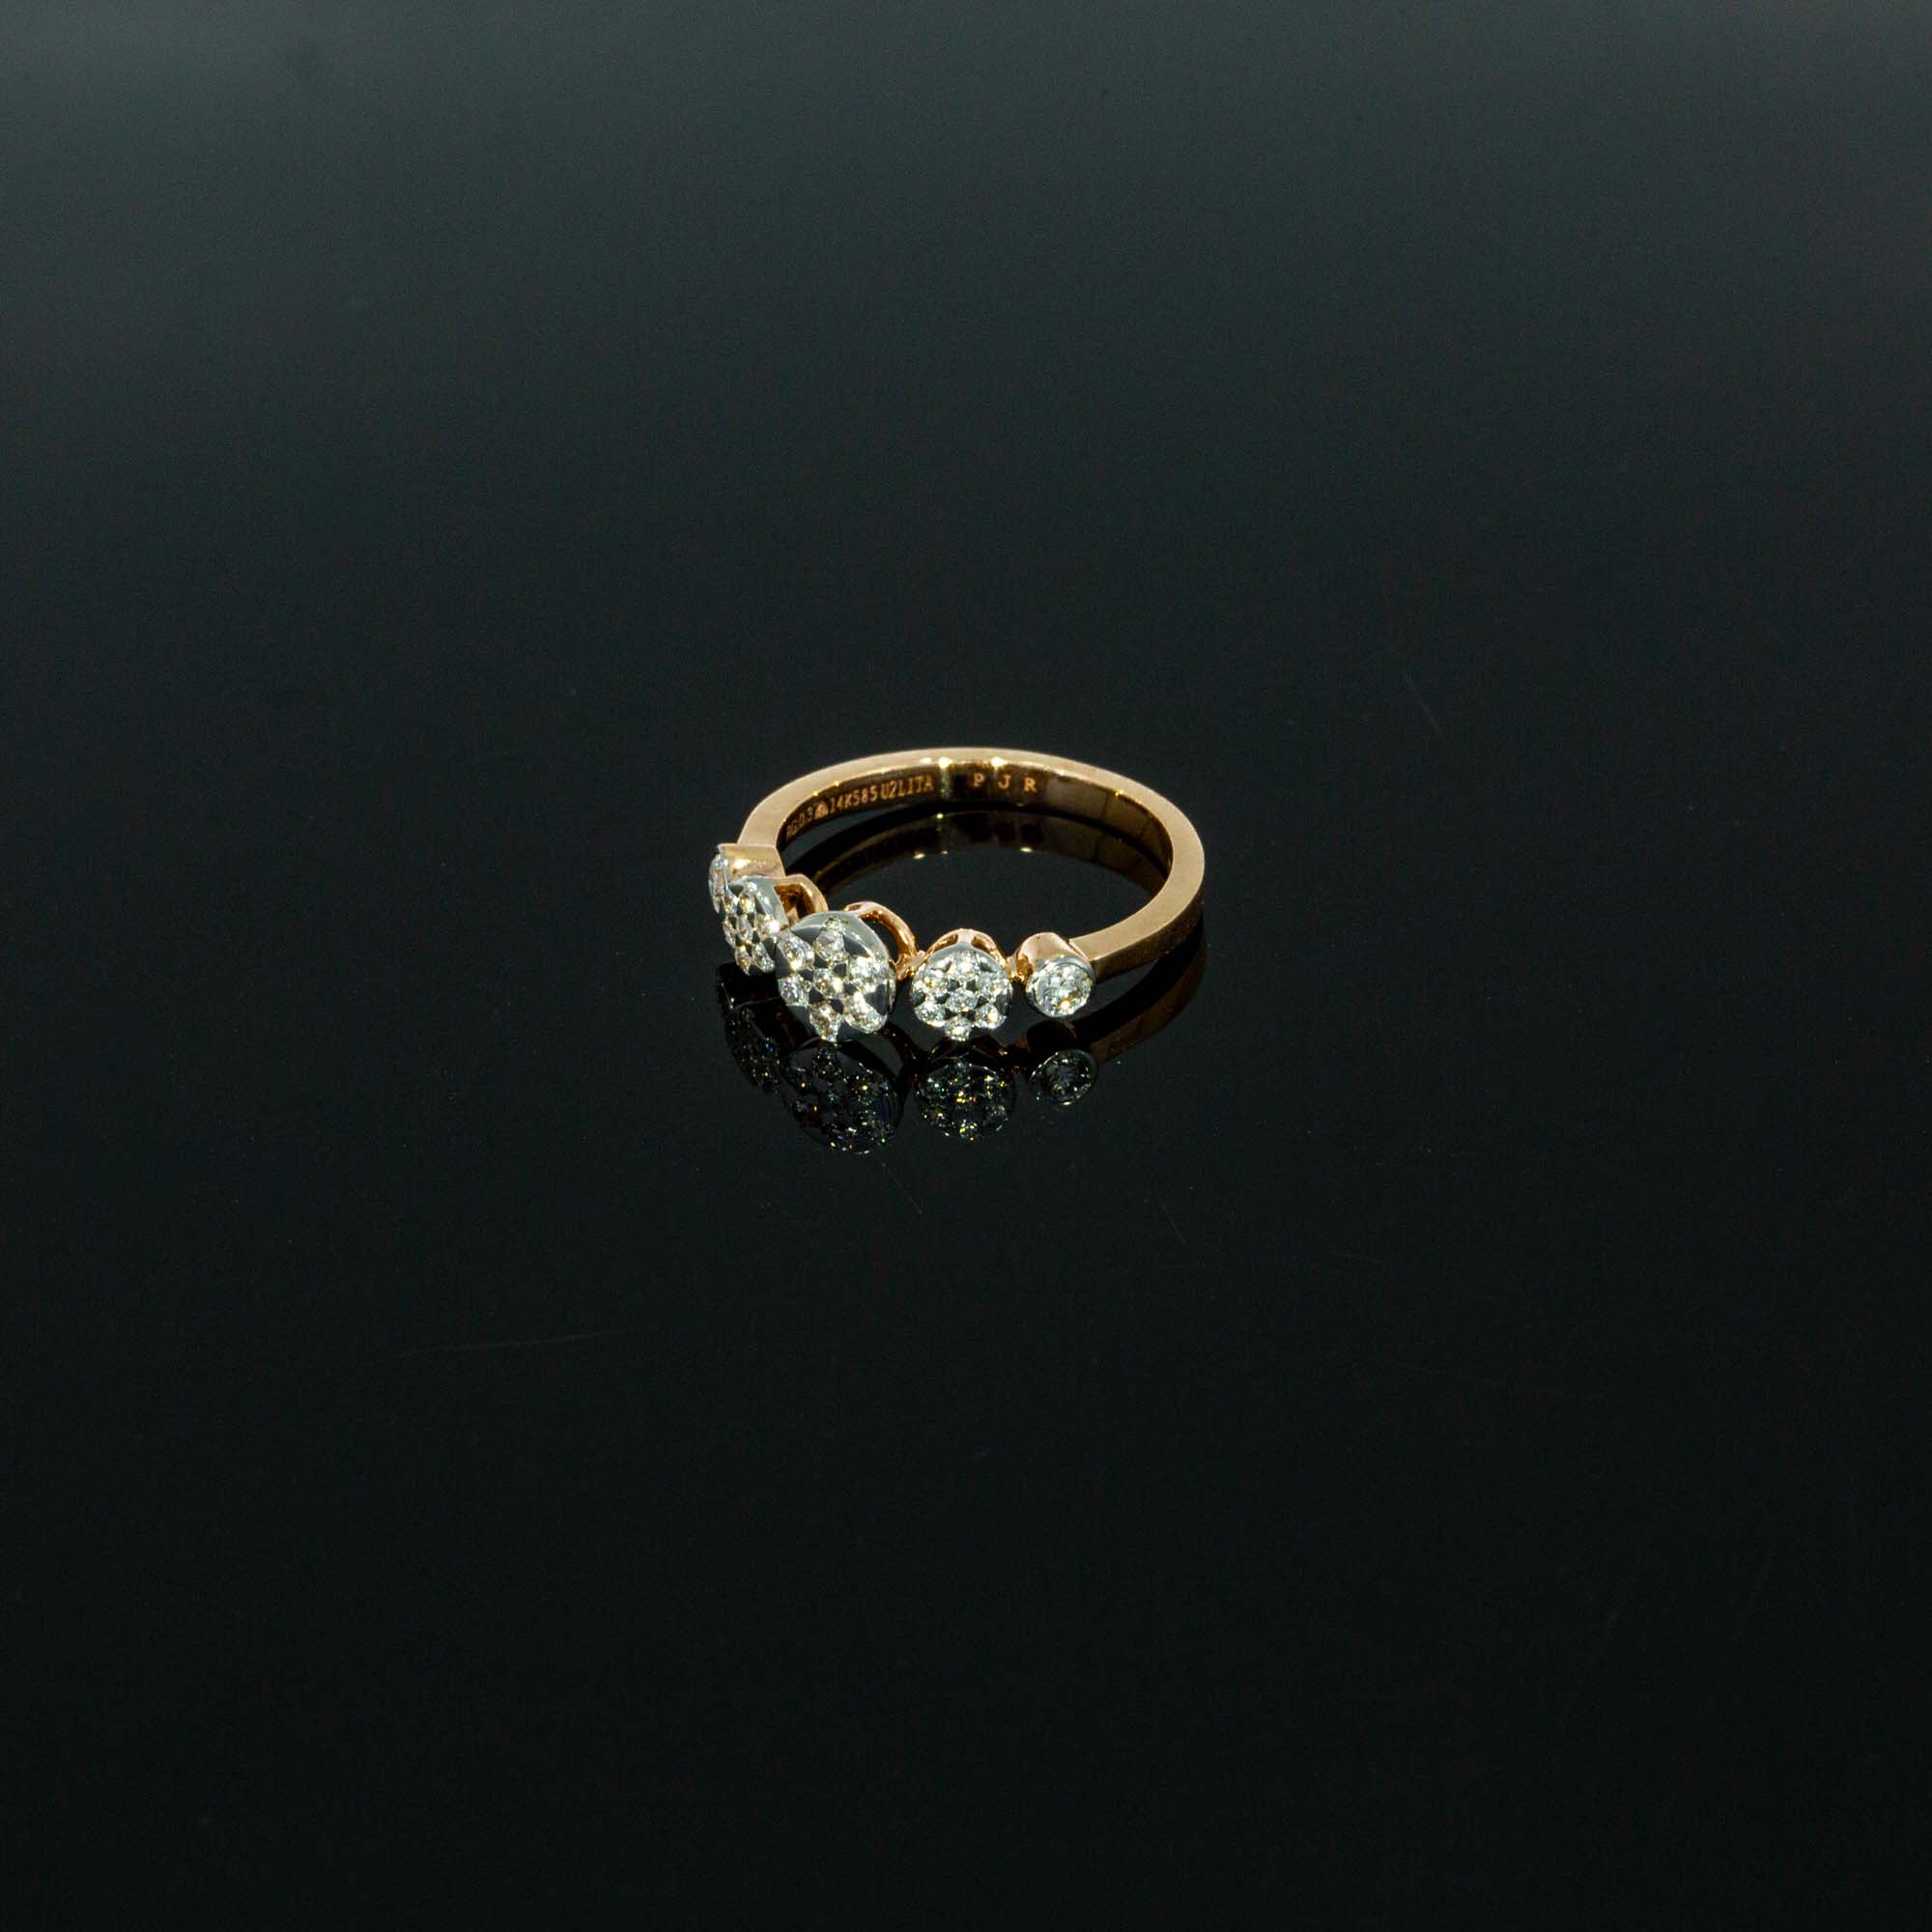 Wedding Rings - Which is More Important? Design or Tradition?